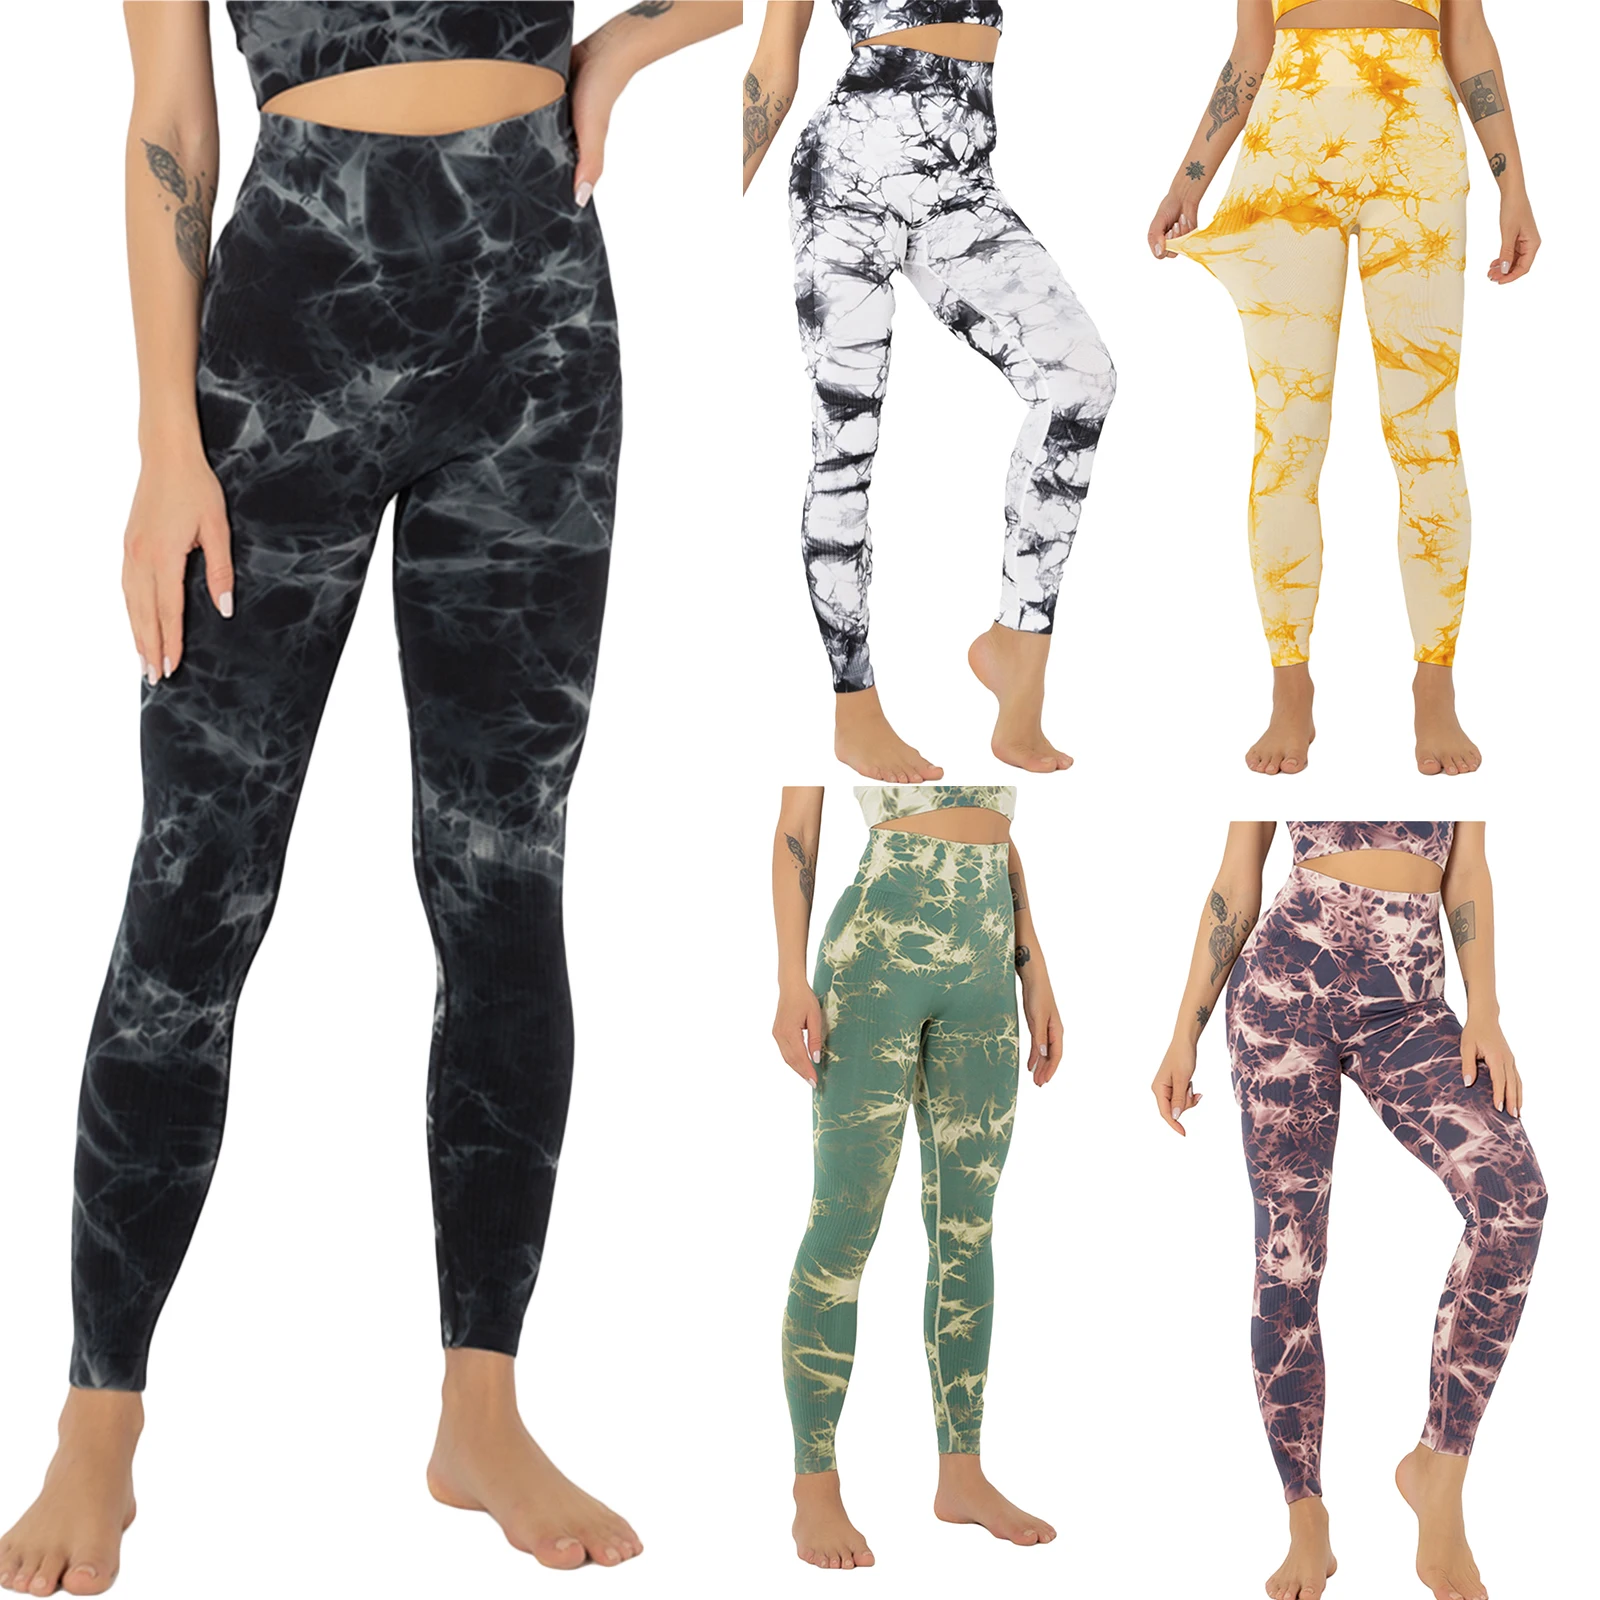 Women Fitness Running Yoga Pants with Tie-dye Printing Gym Tights Elastic Wide Waist Skinny Fit Clothing Female Push Up Leggins